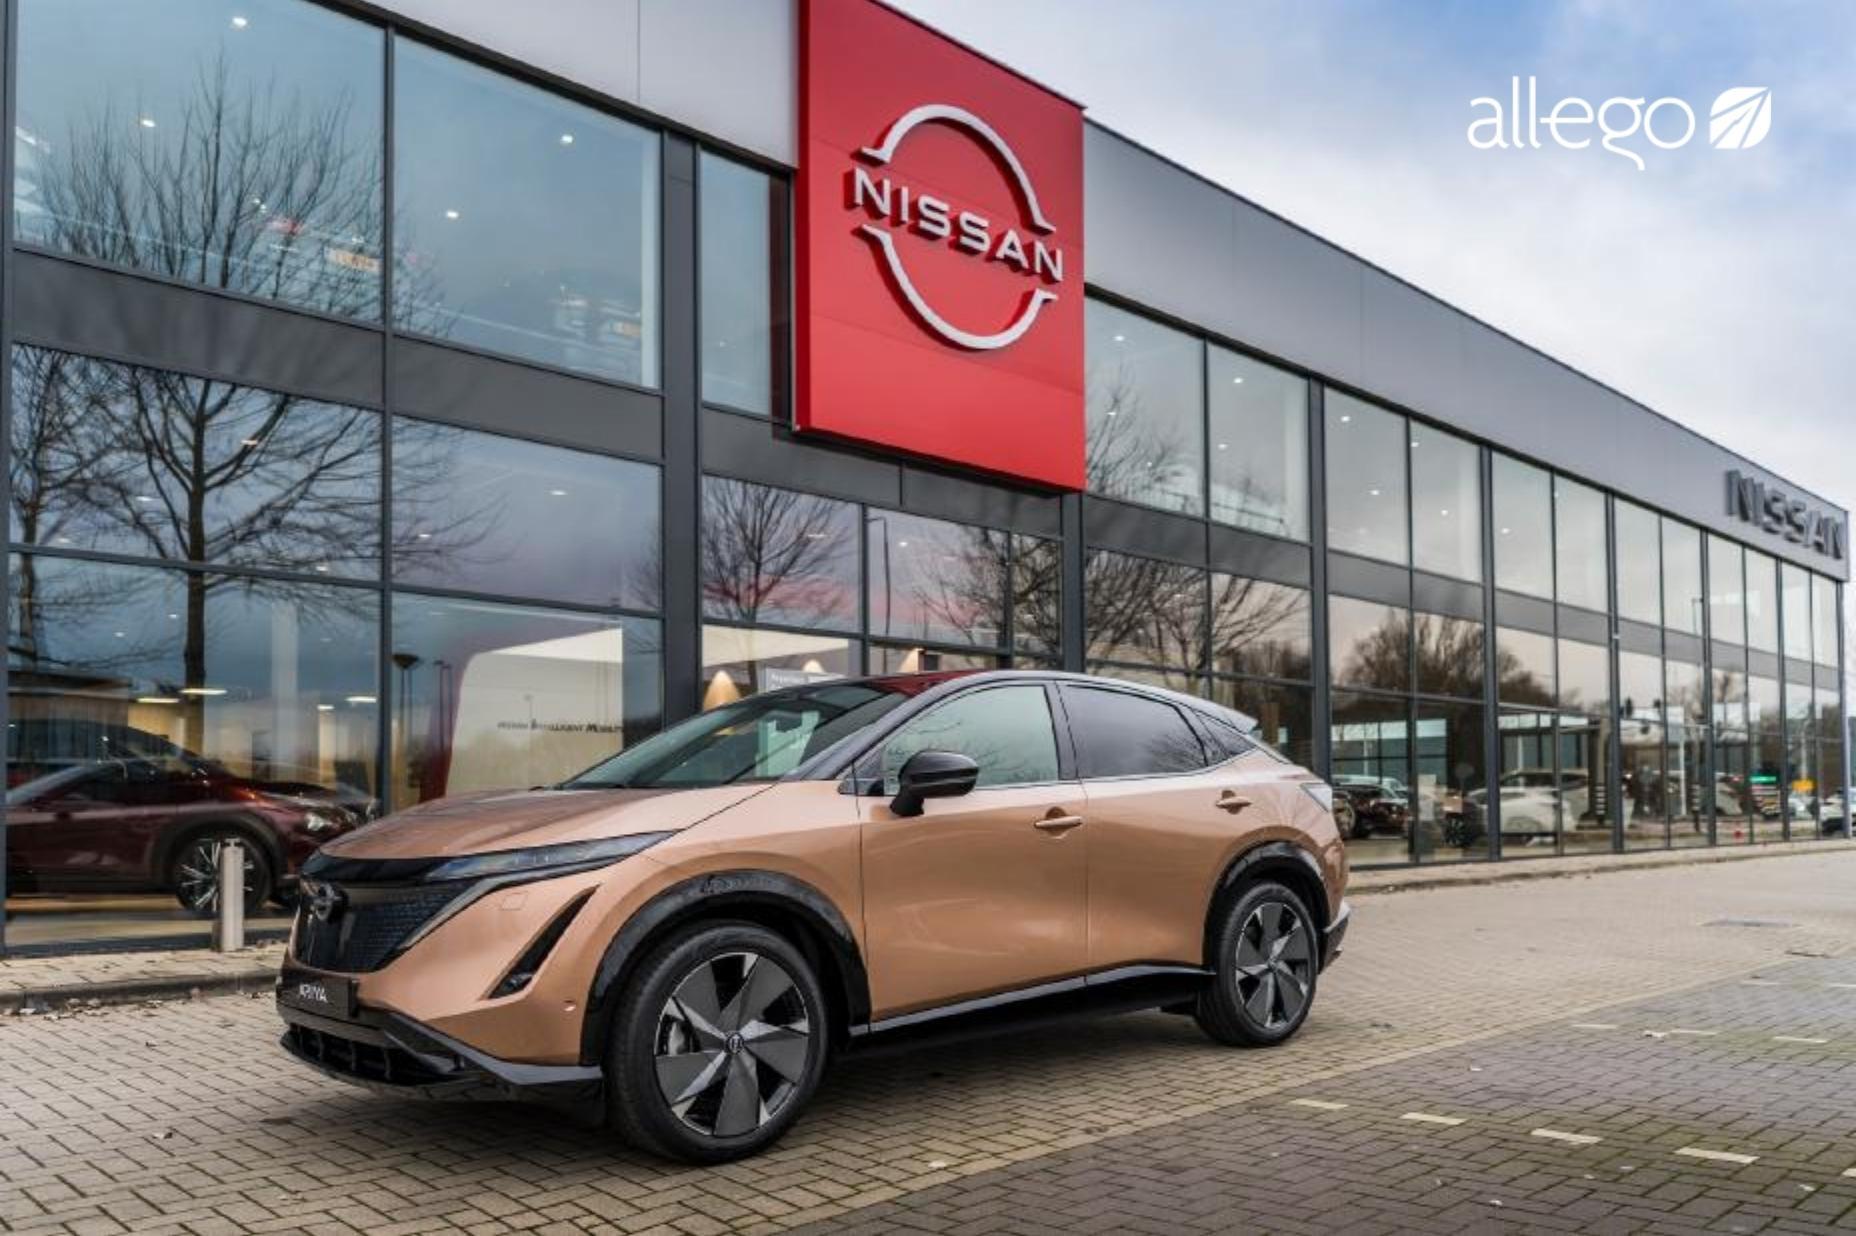 Allego Enters into Strategic Partnership with Nissan